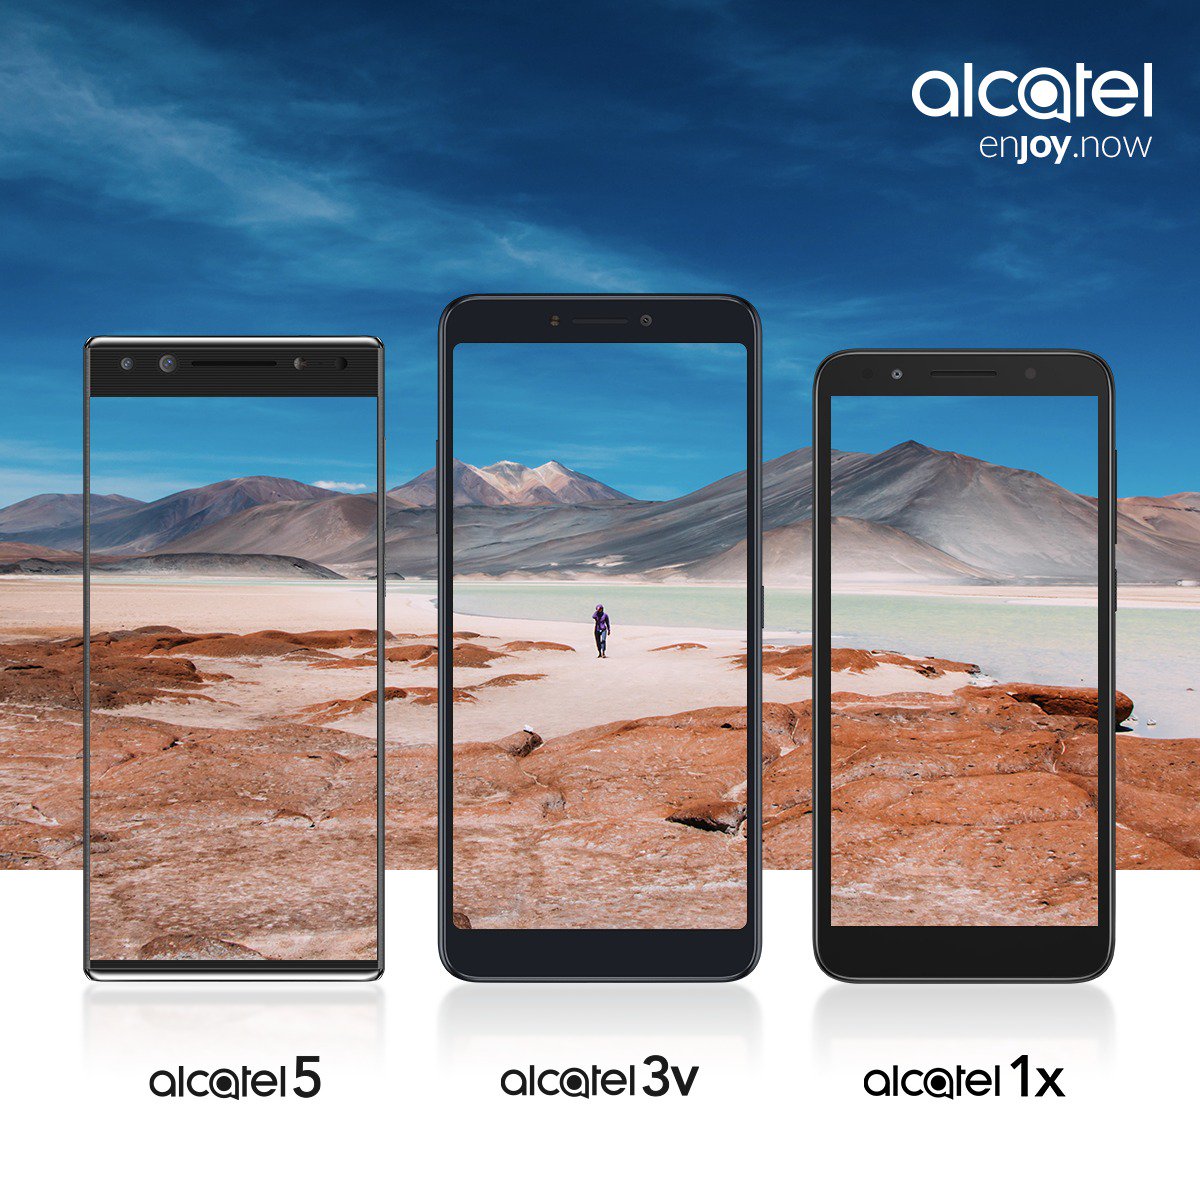 Three New Alcatel Smartphones to be Launched at MWC